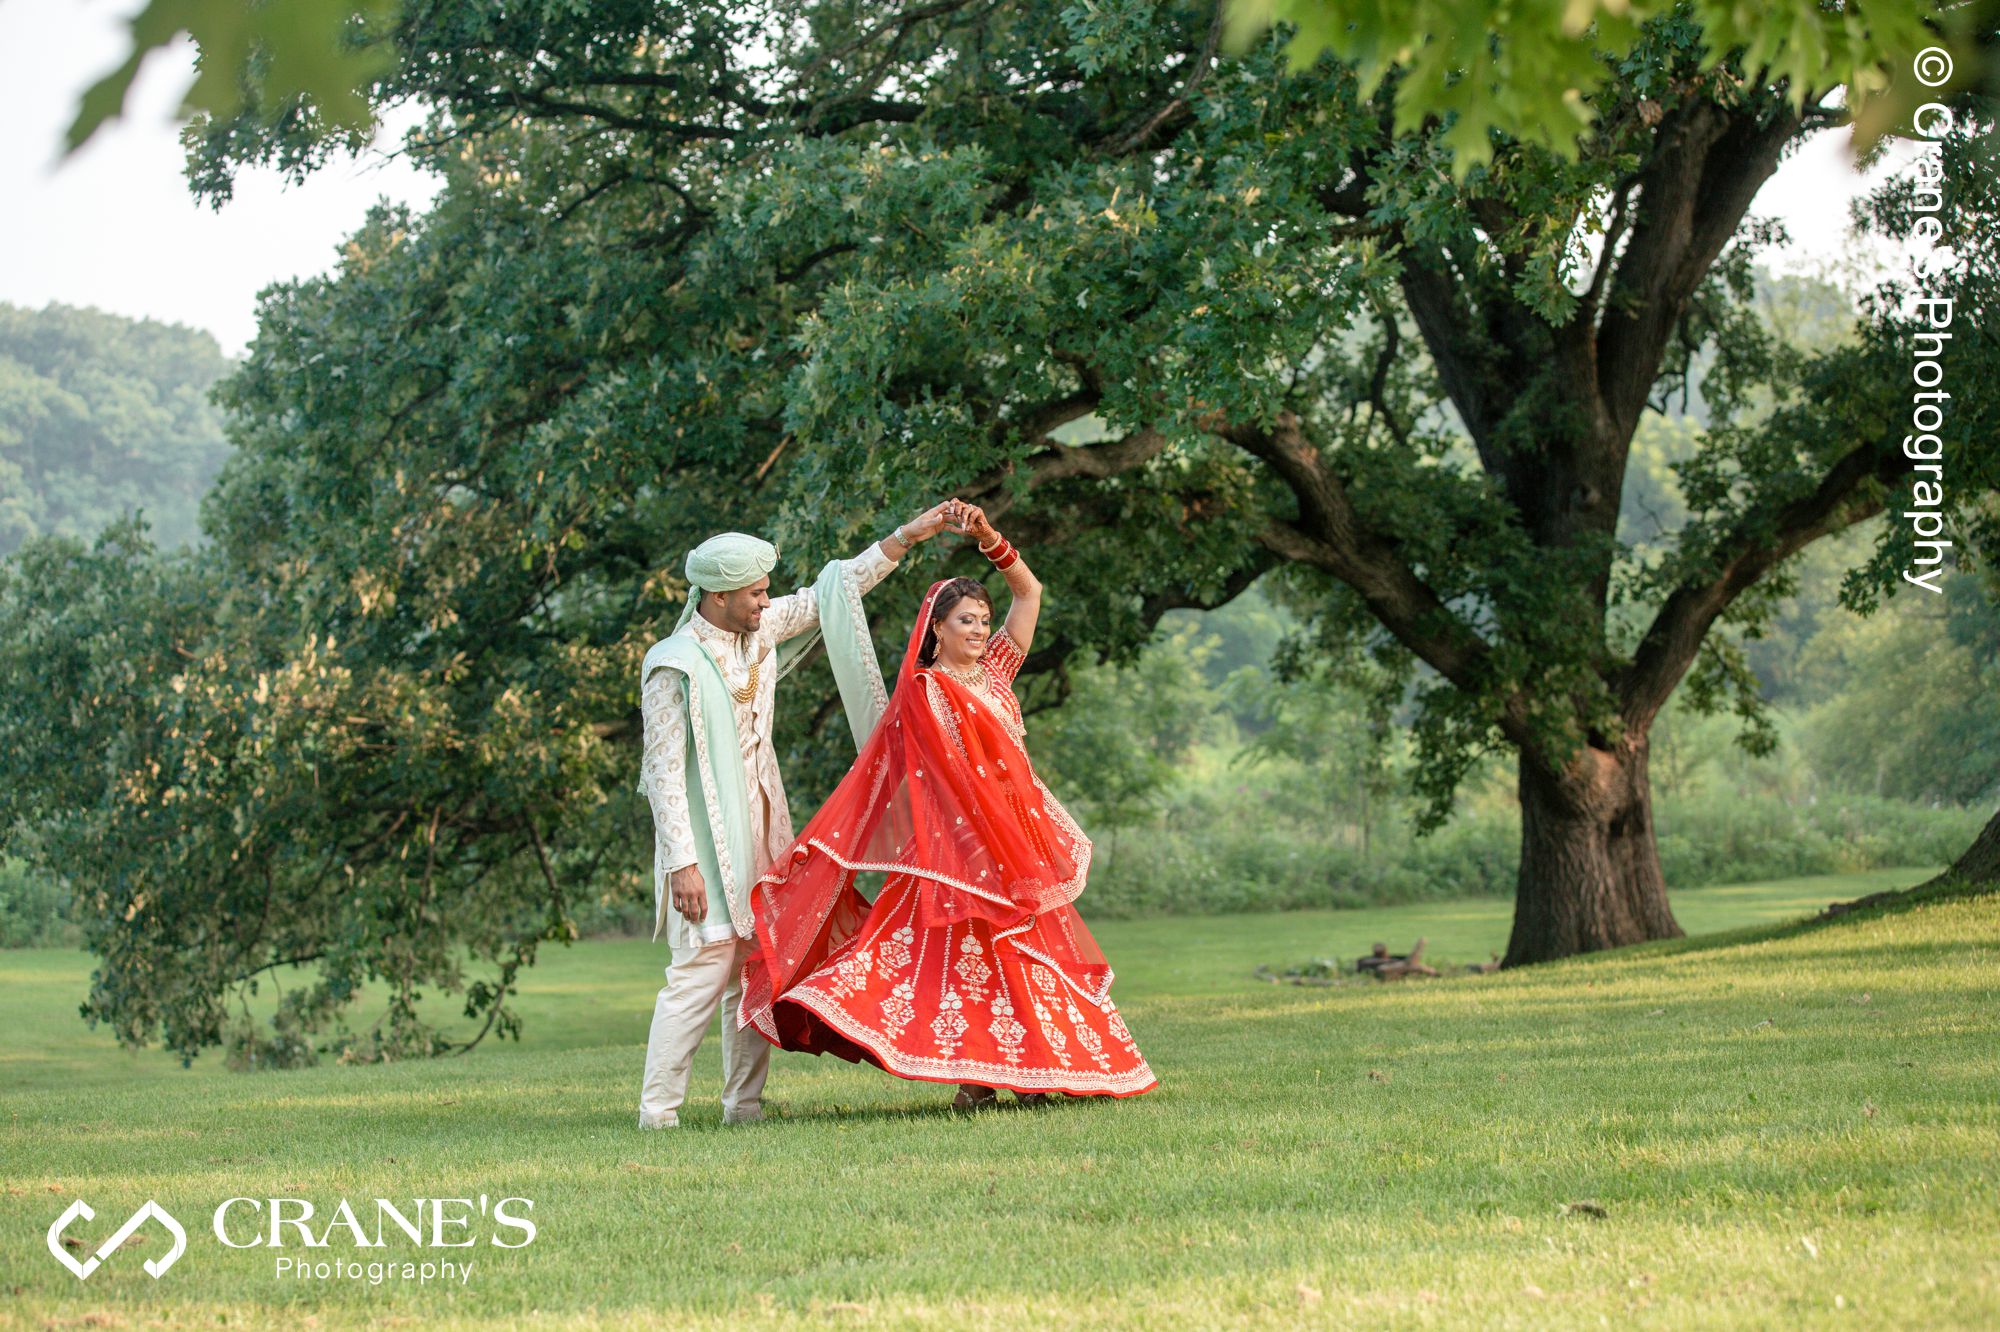 A groom is twirling his bride at Creek Bend Nature Center before their outdoor ceremony